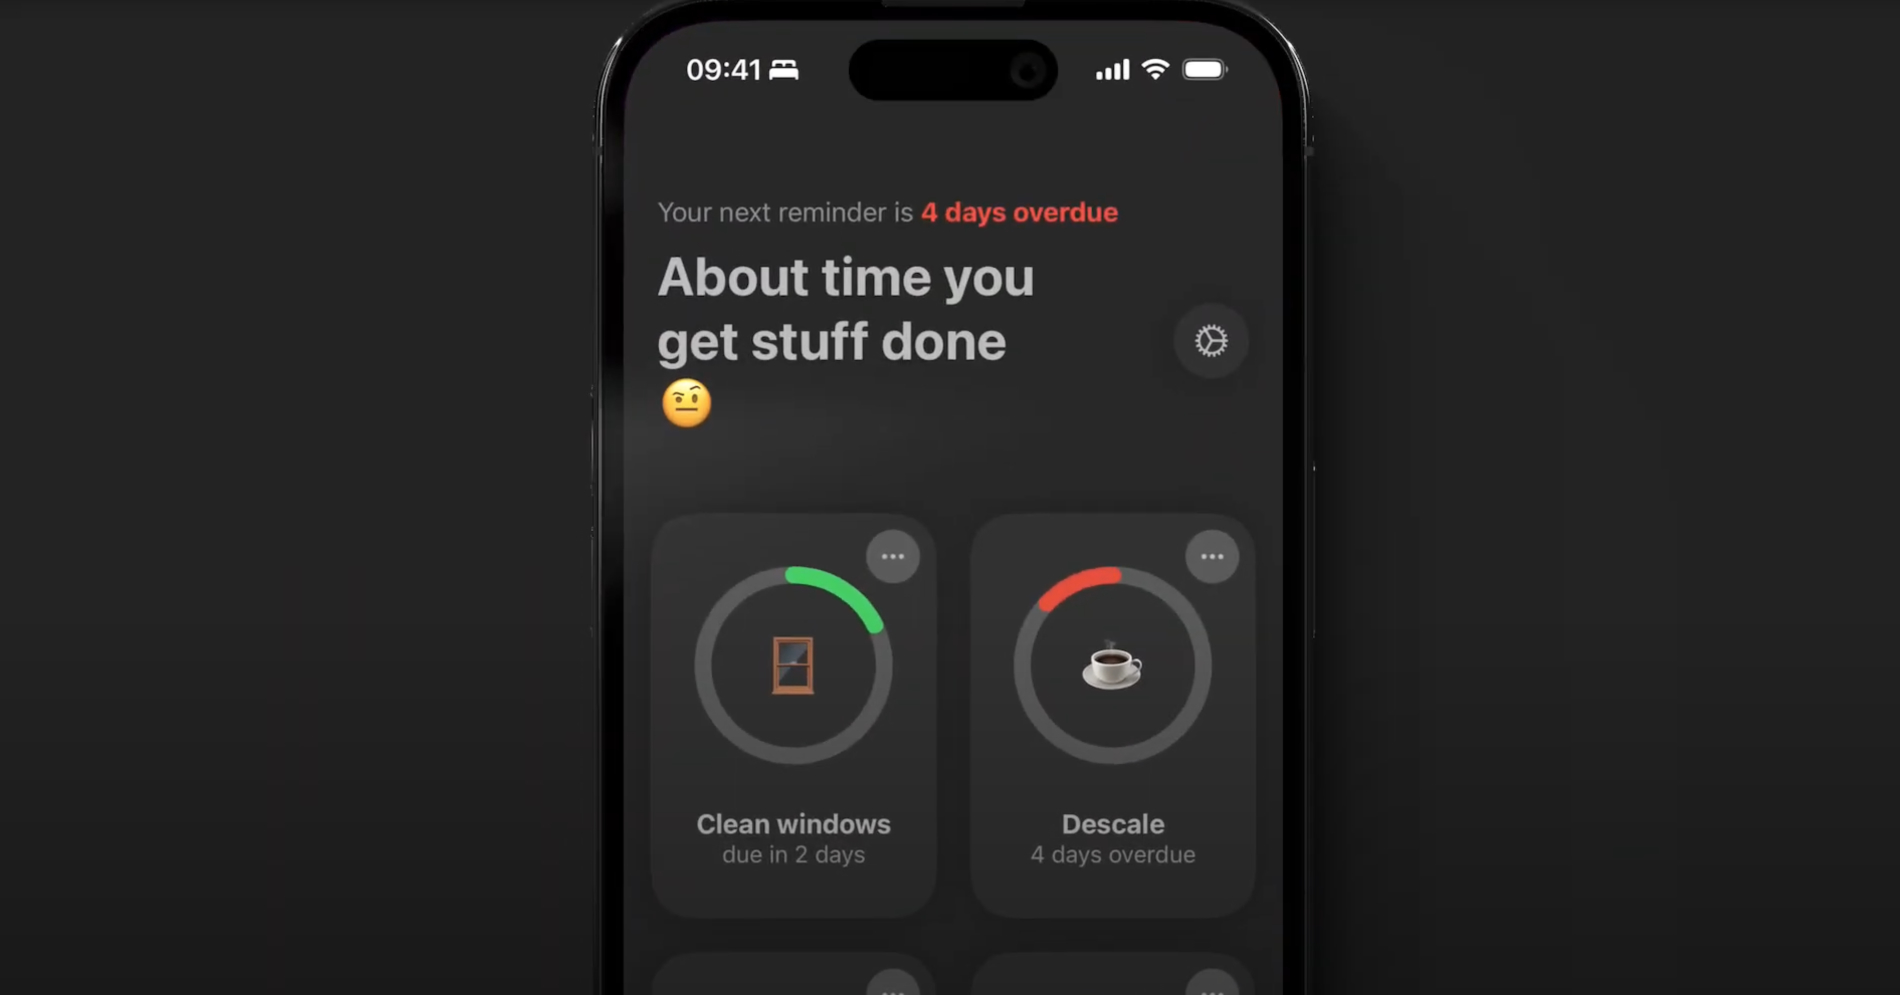 Mindr Makes Use of Interactive Widgets to Provide a New Approach for Reminders